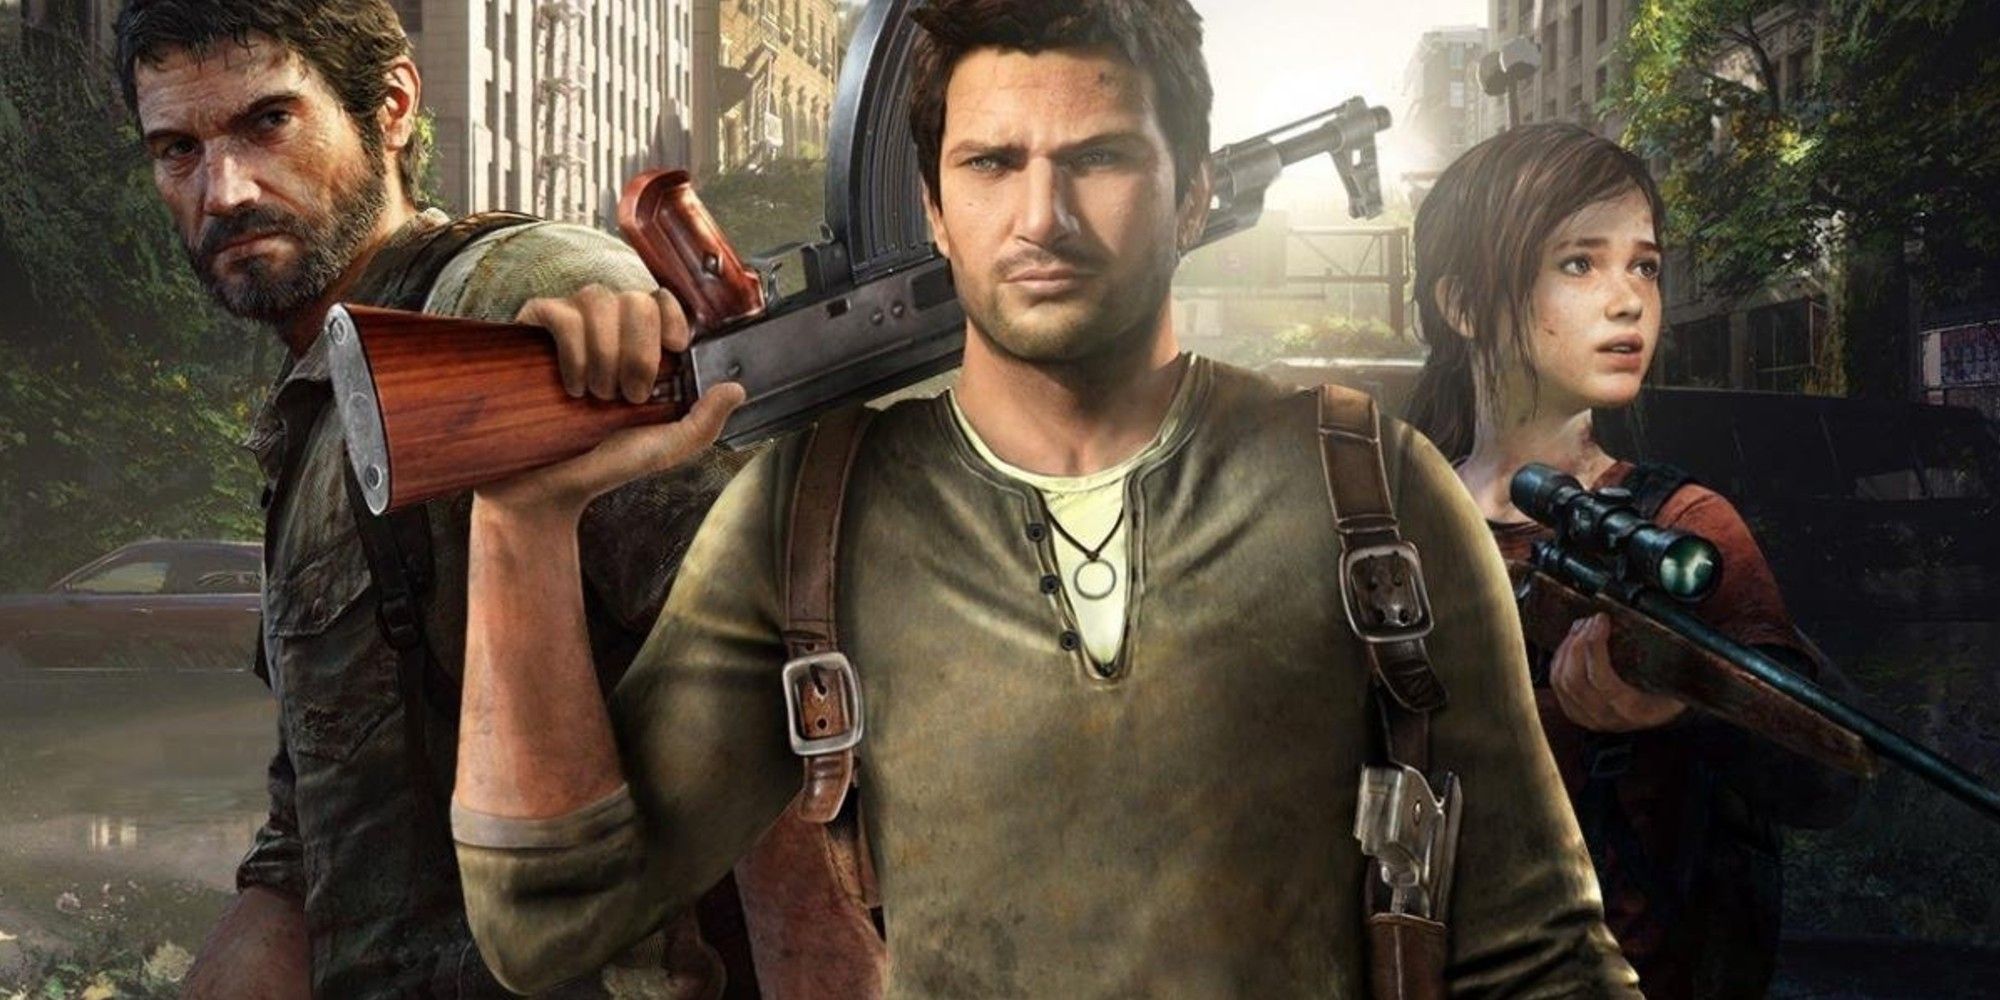 characters from Uncharted and The Last of Us 2